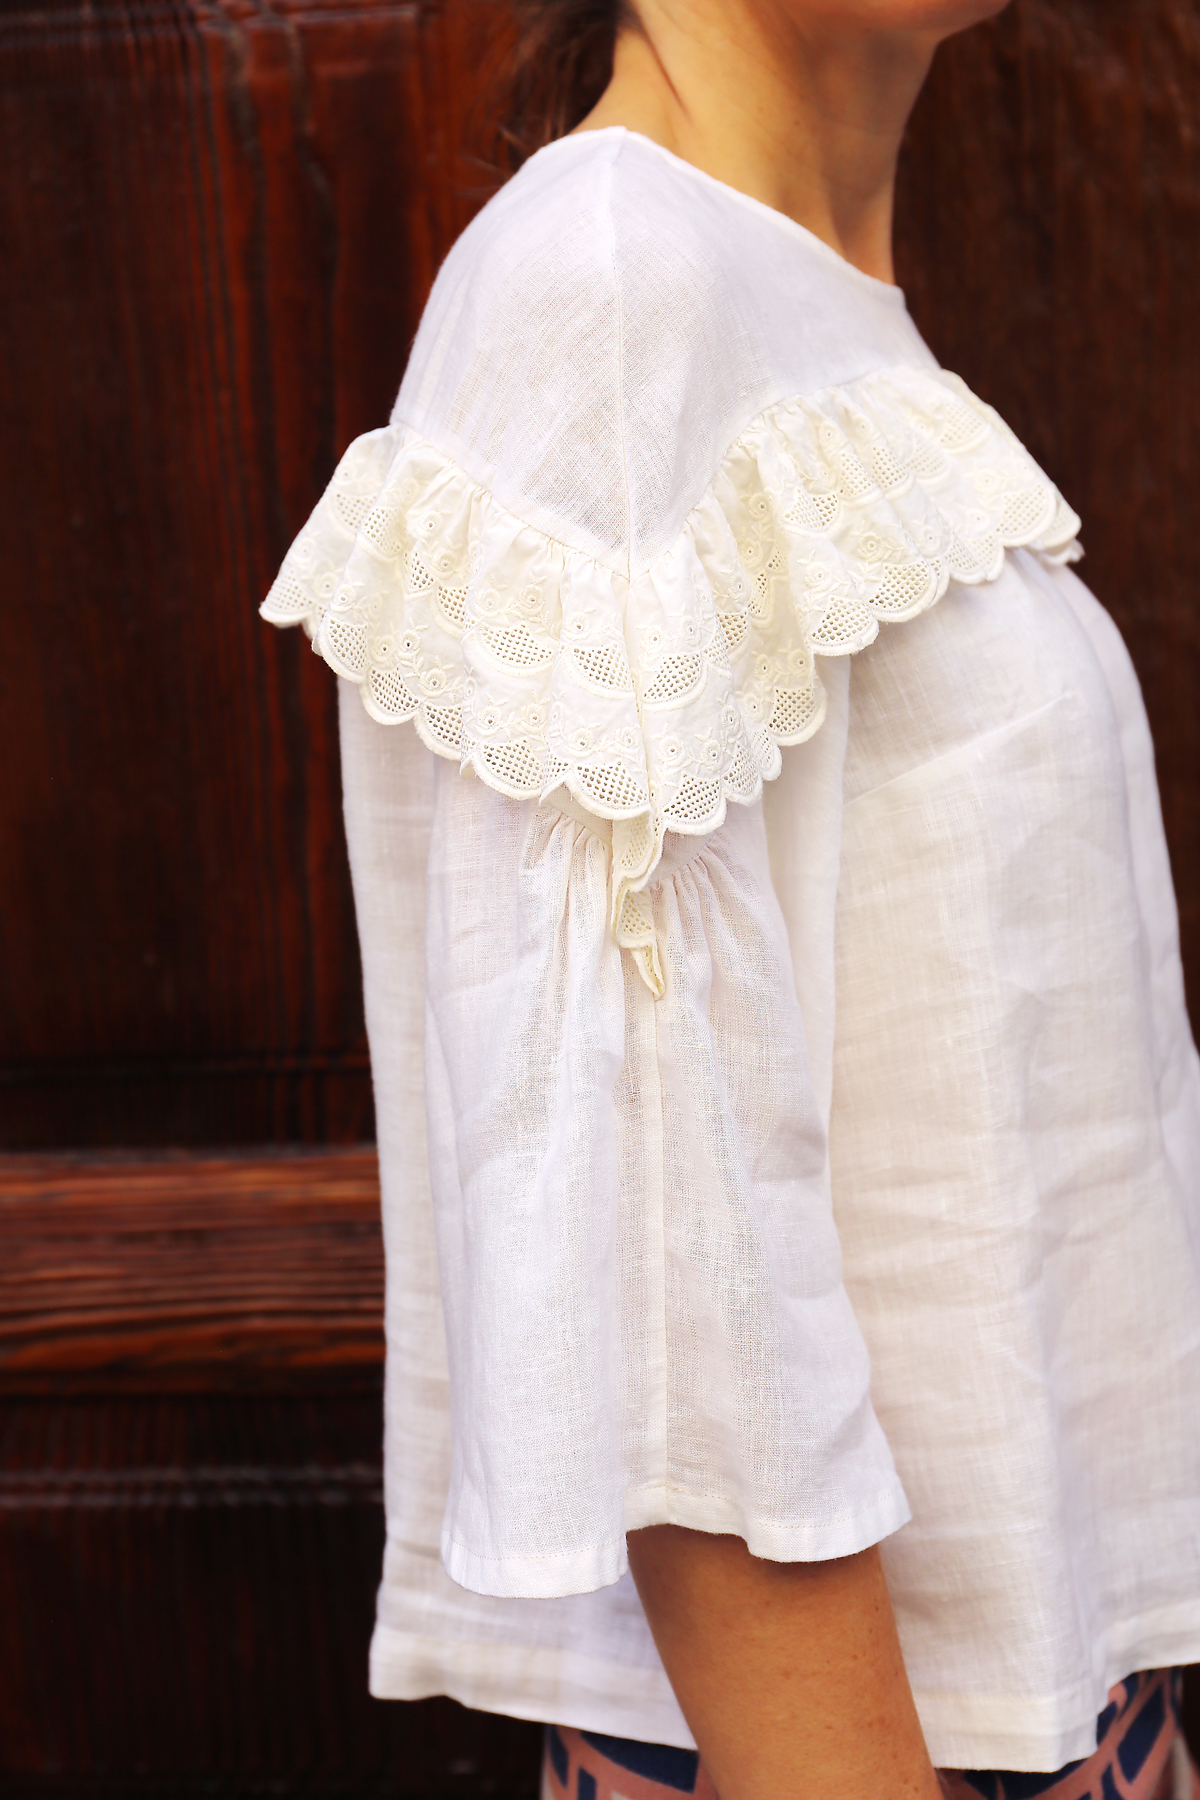 Adding a Lace Ruffle Detail to the Afternoon Tea Blouse, Blog